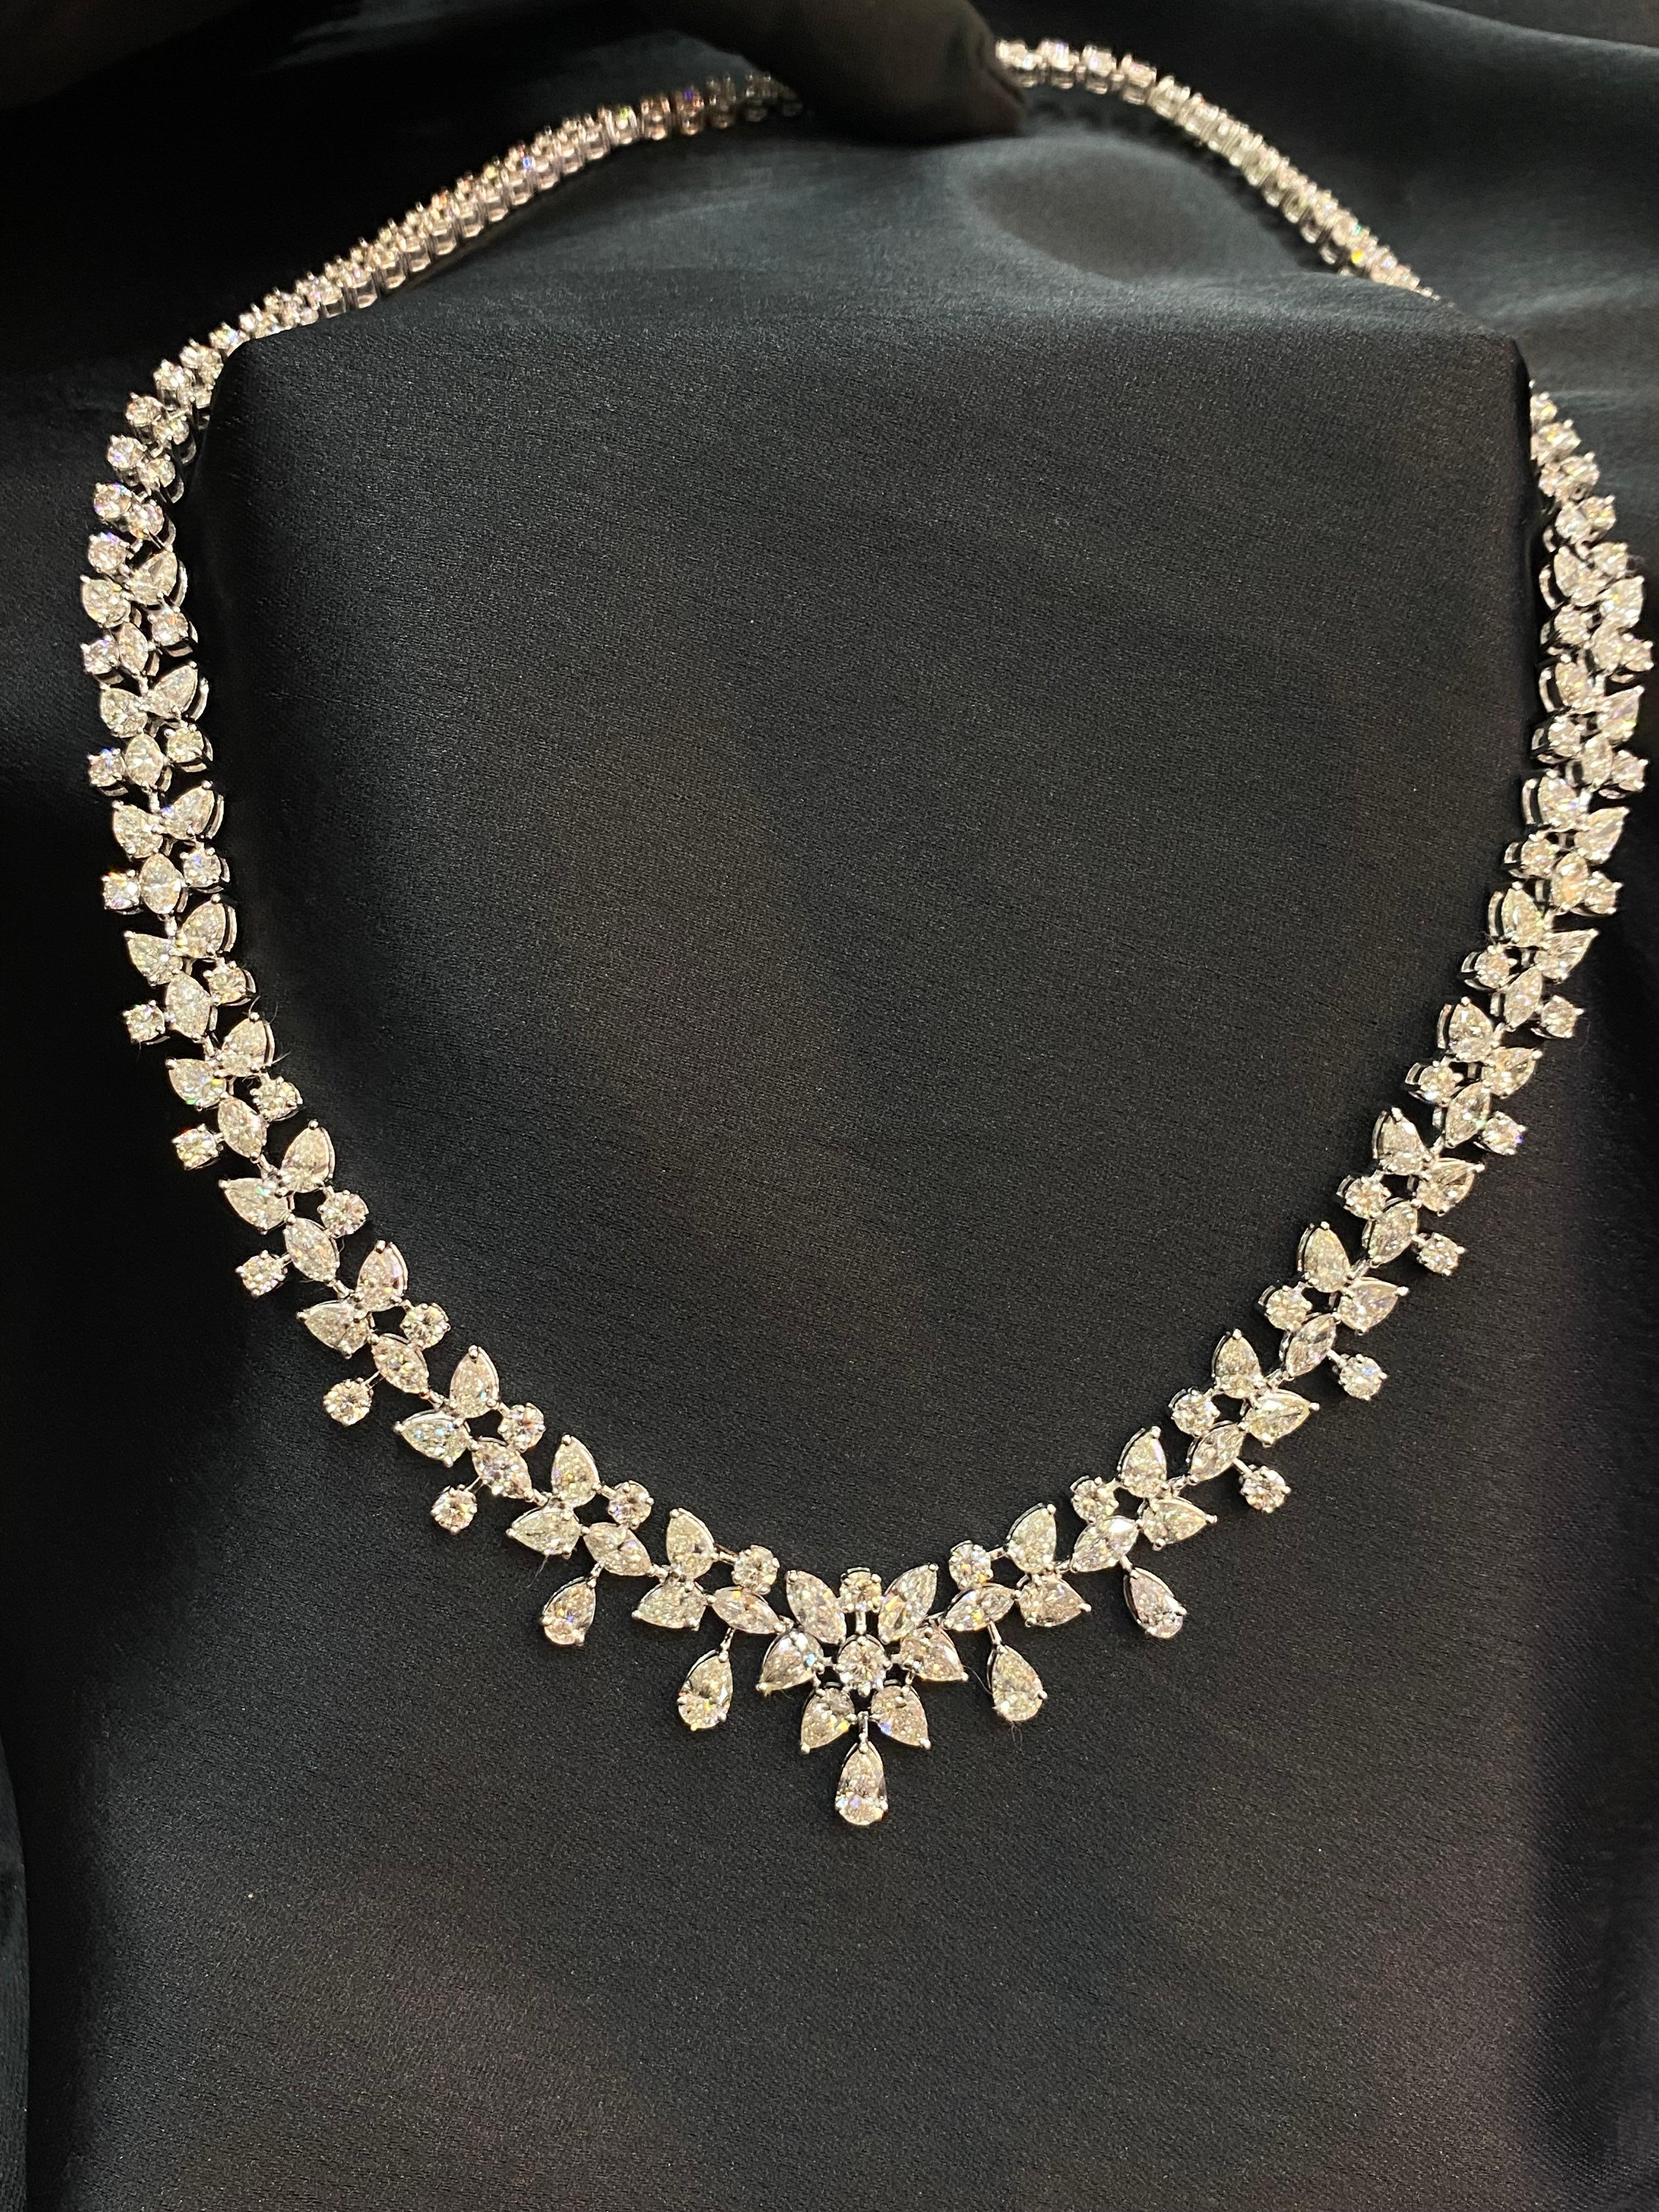 27.76 Carats Marquise Pear Round Shape Natural Diamonds Necklace 18K White Gold In New Condition For Sale In Massafra, IT